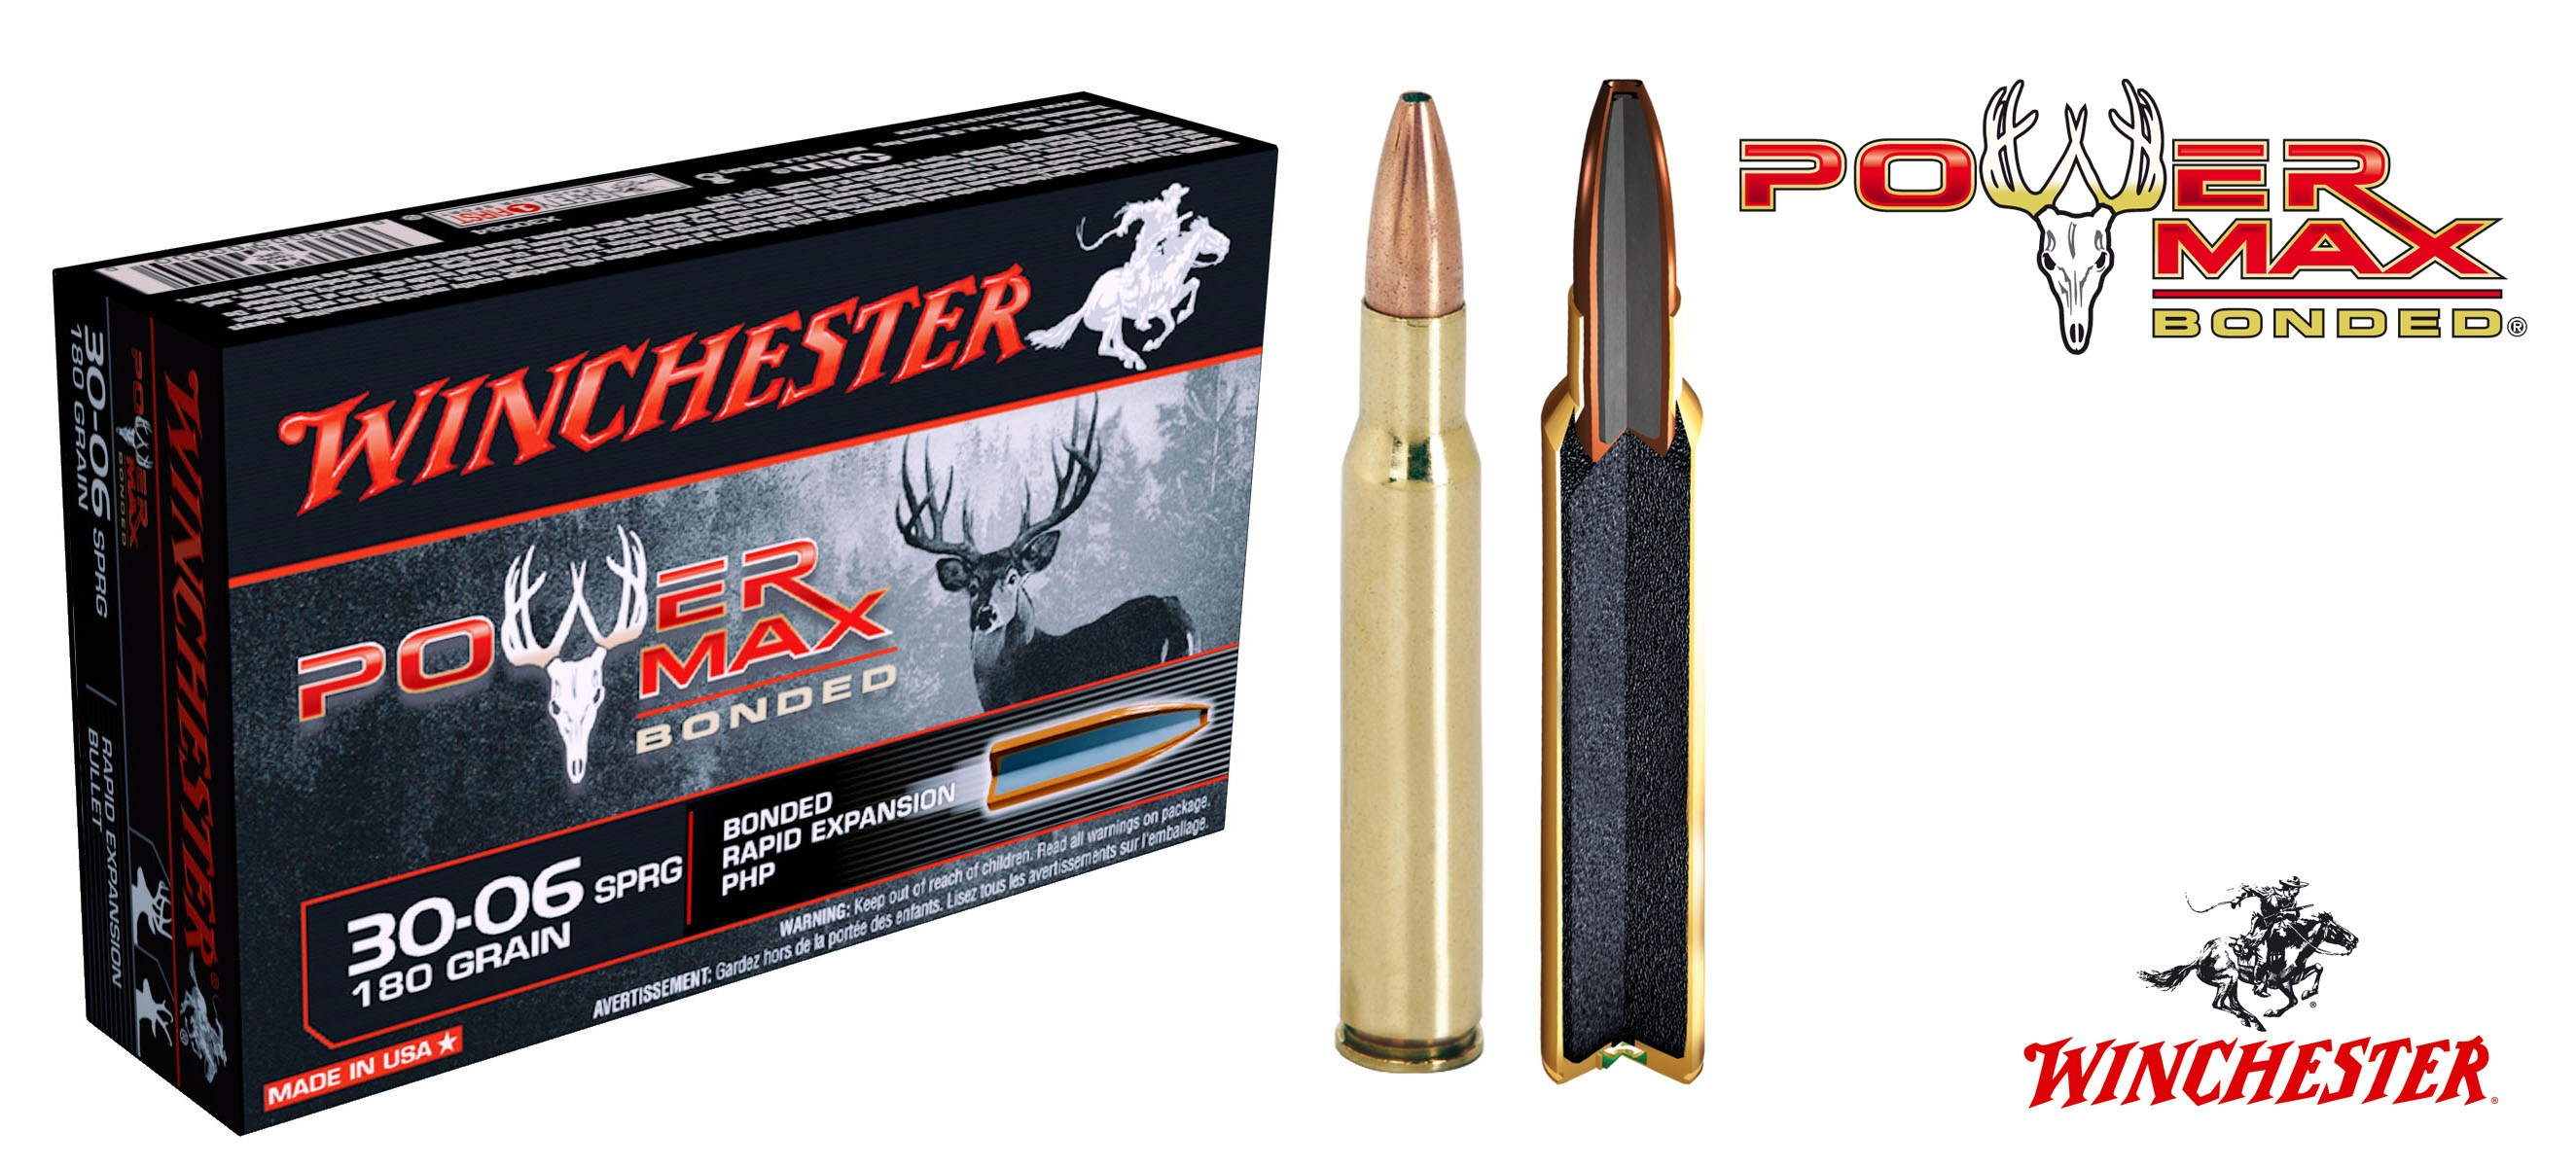 Патрон 30-06Sprg Winchester Power max bonded PHP 11,66г 1/20